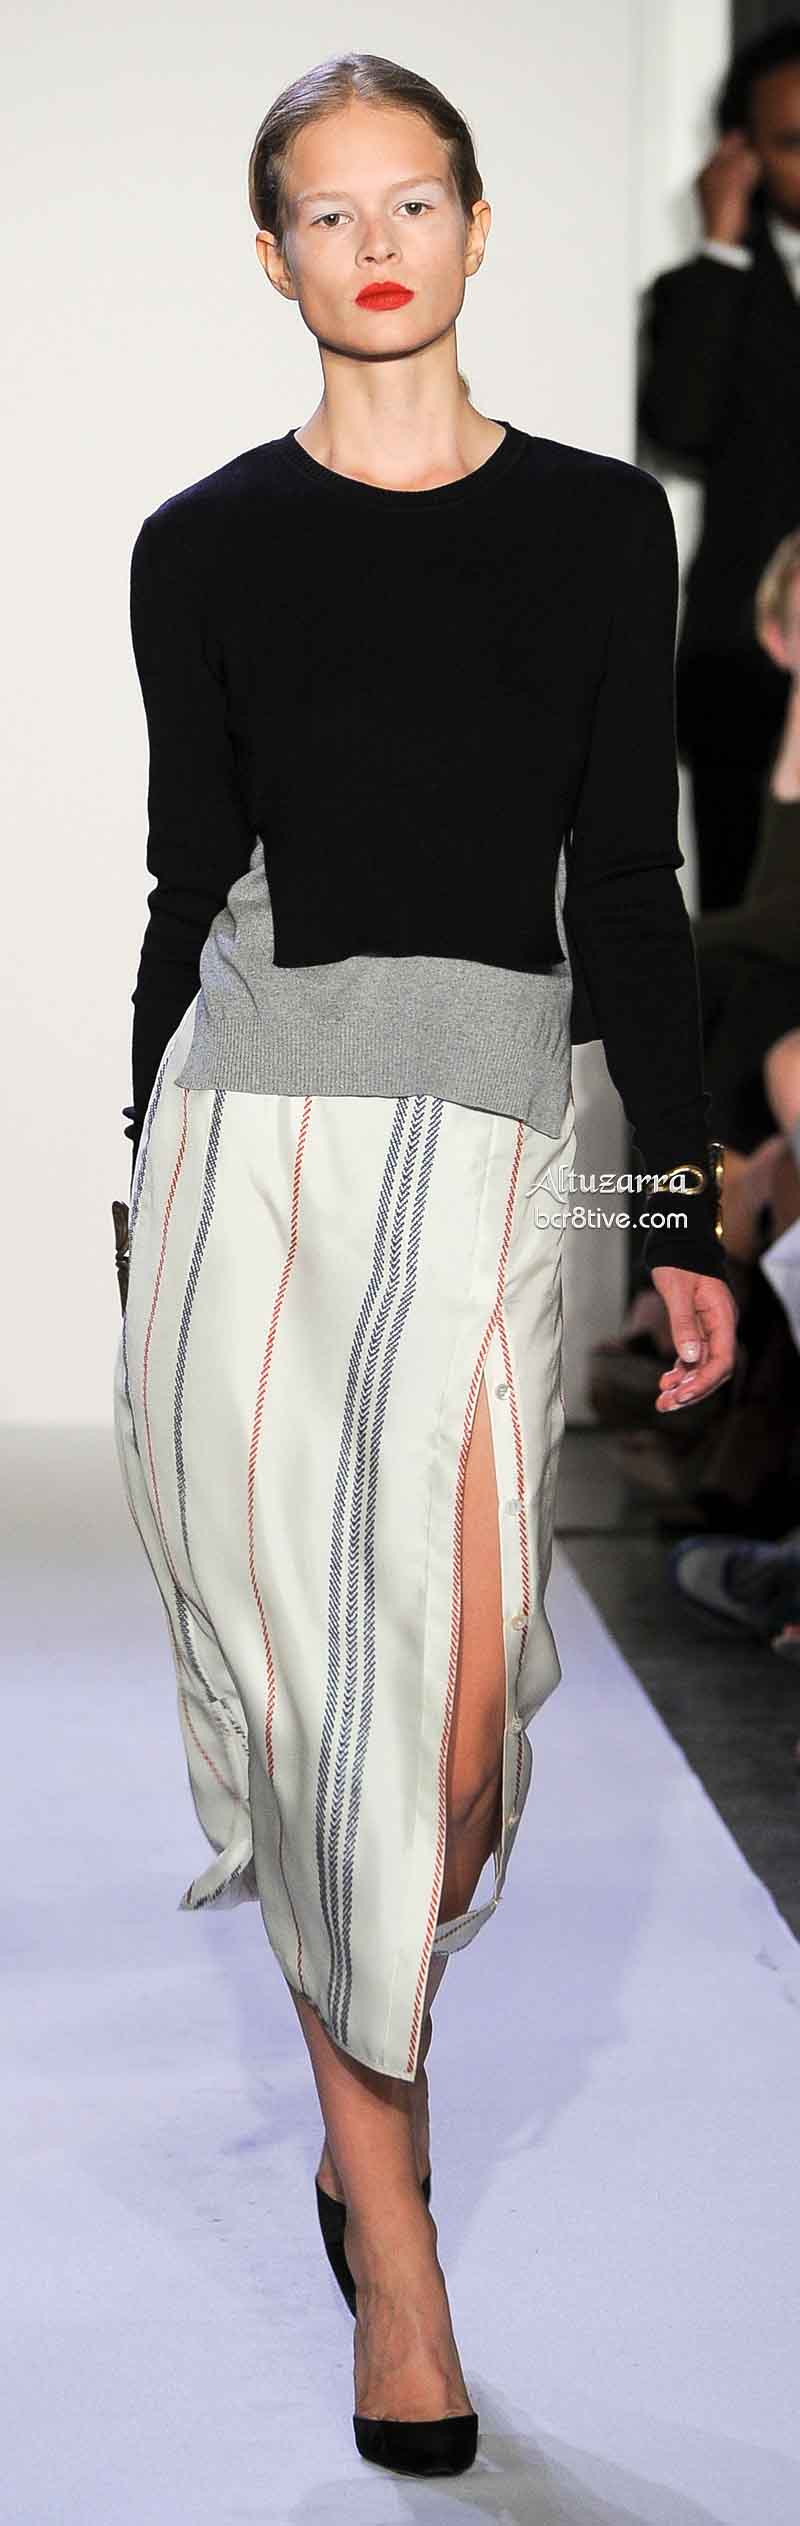 Altuzarra Layered Knits and Striped Pencil Skirt